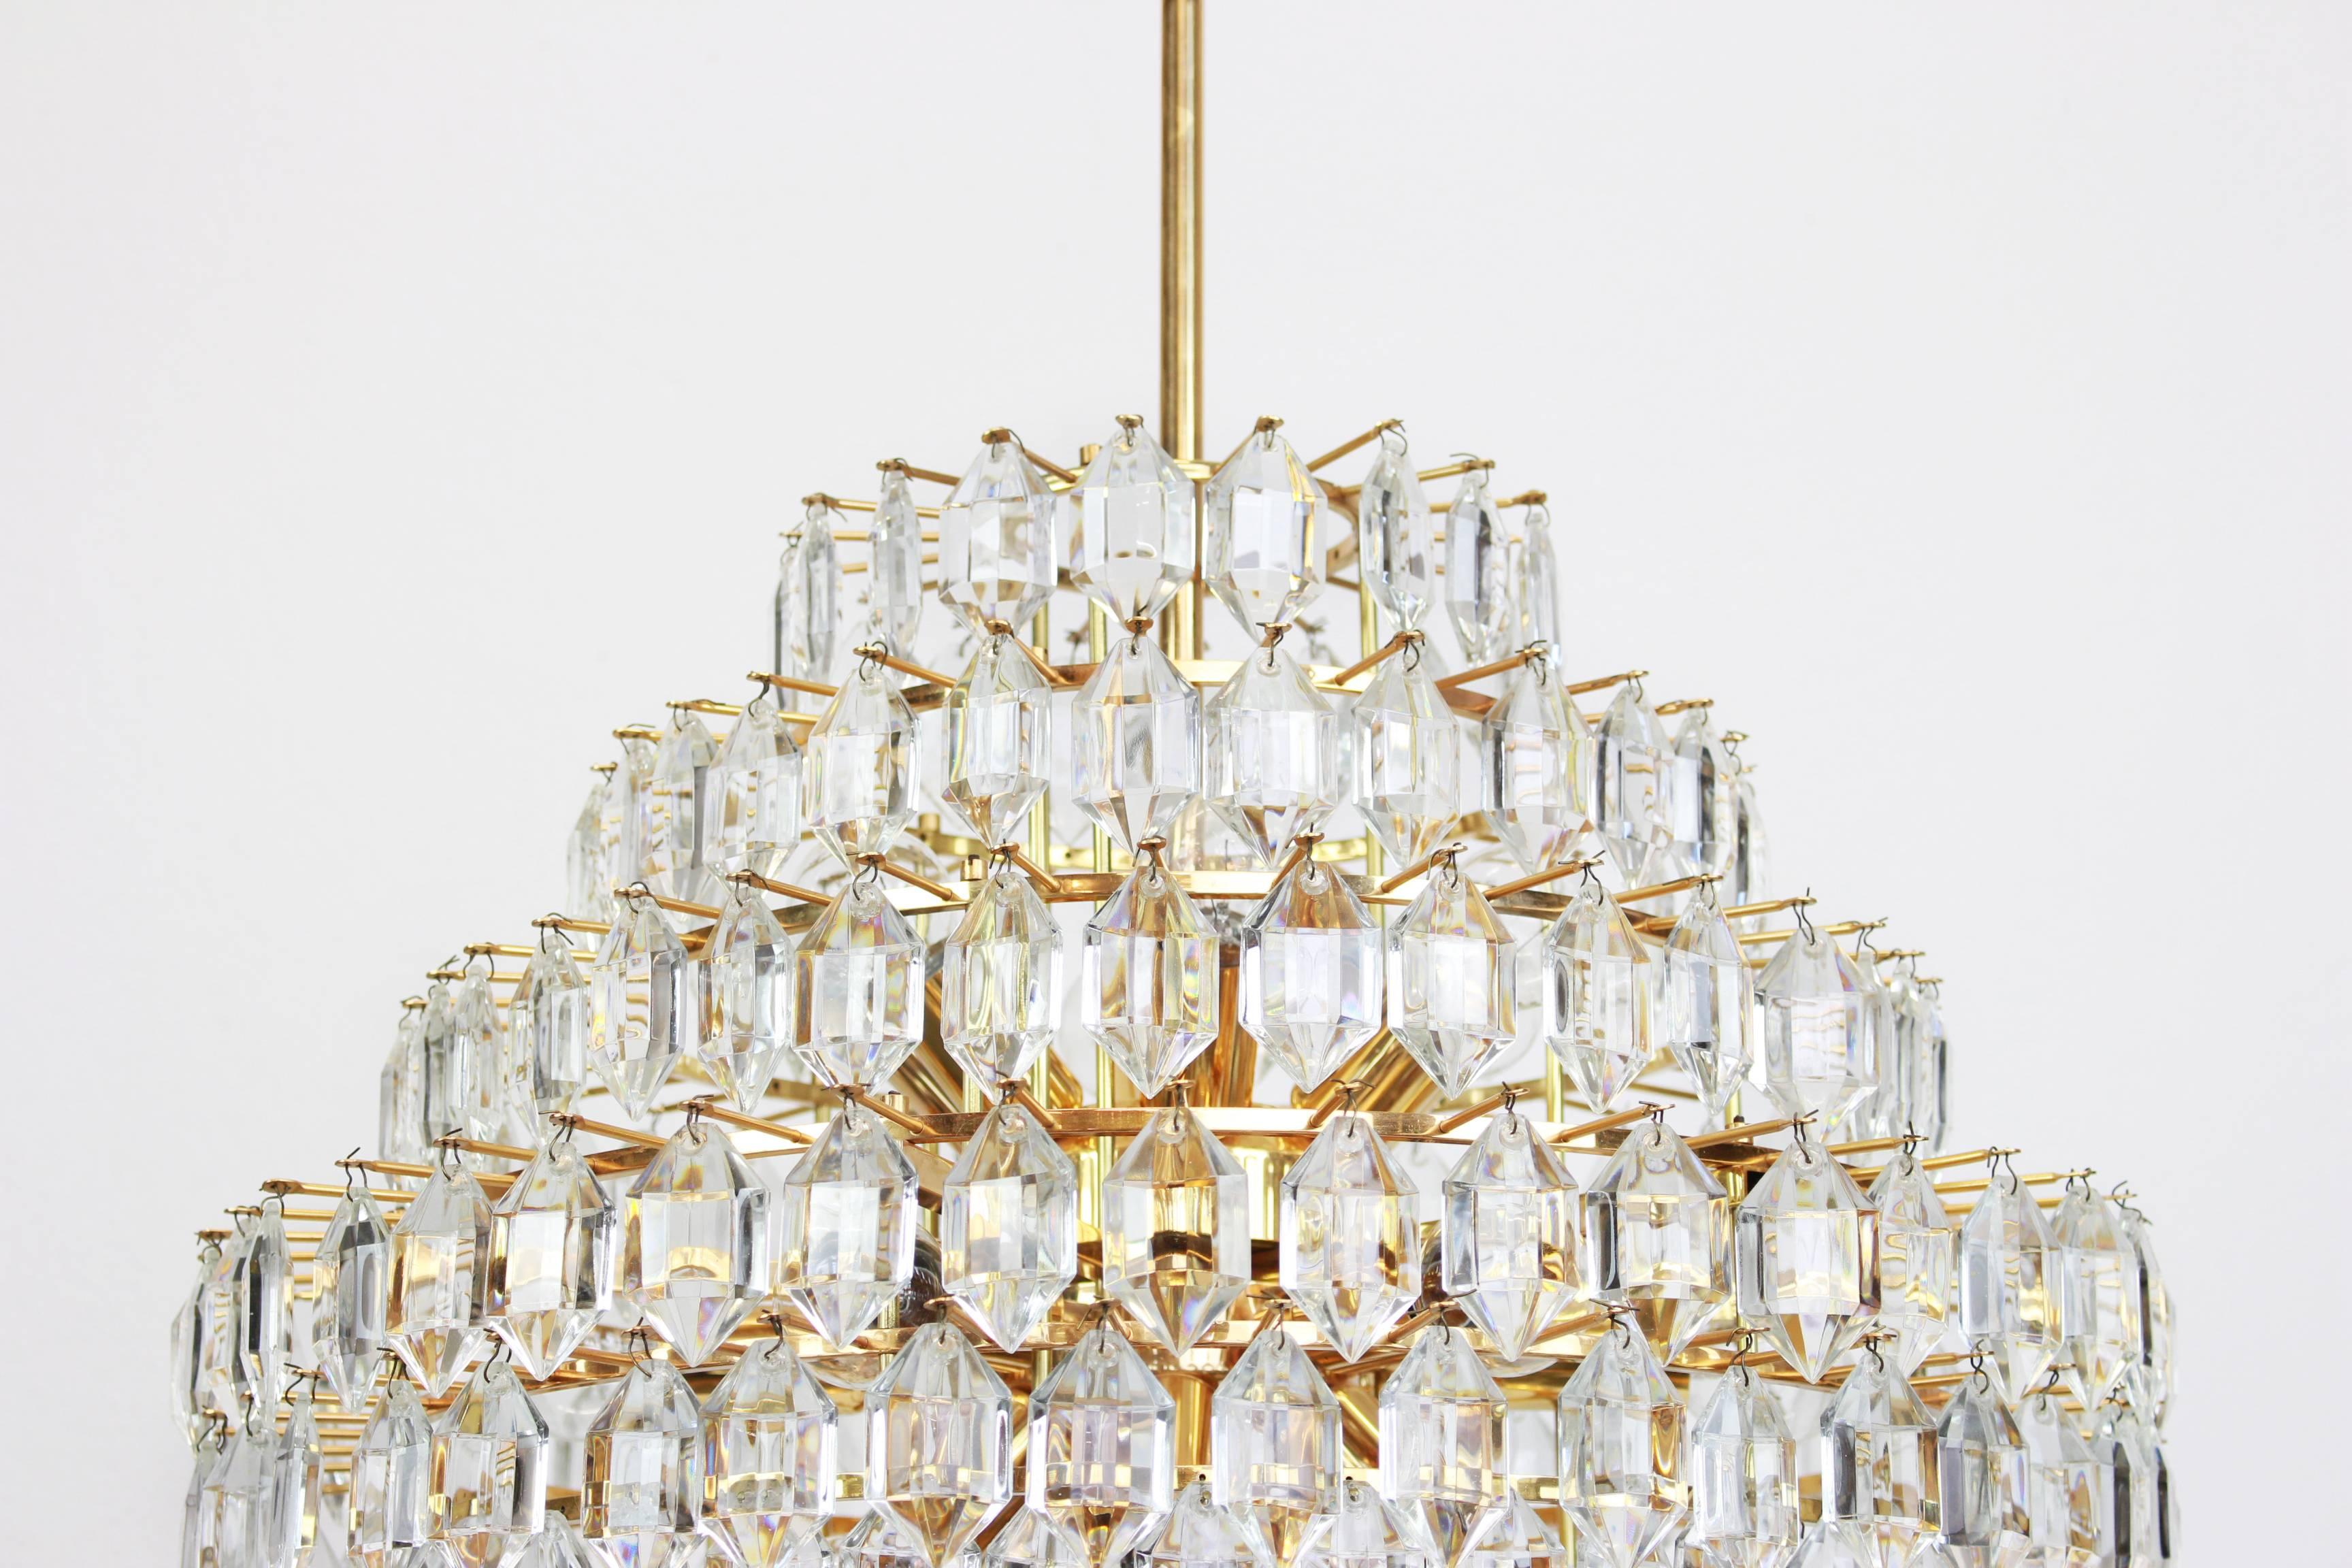 Mid-Century Bakalowits chandelier, brass and crystal glass, Austria, 1960s.

A stunning nine-tier chandelier by Bakalowits & Sohne, Austria, manufactured in circa 1960-1969. A handmade and high-quality piece. The ceiling fixture and the frame are